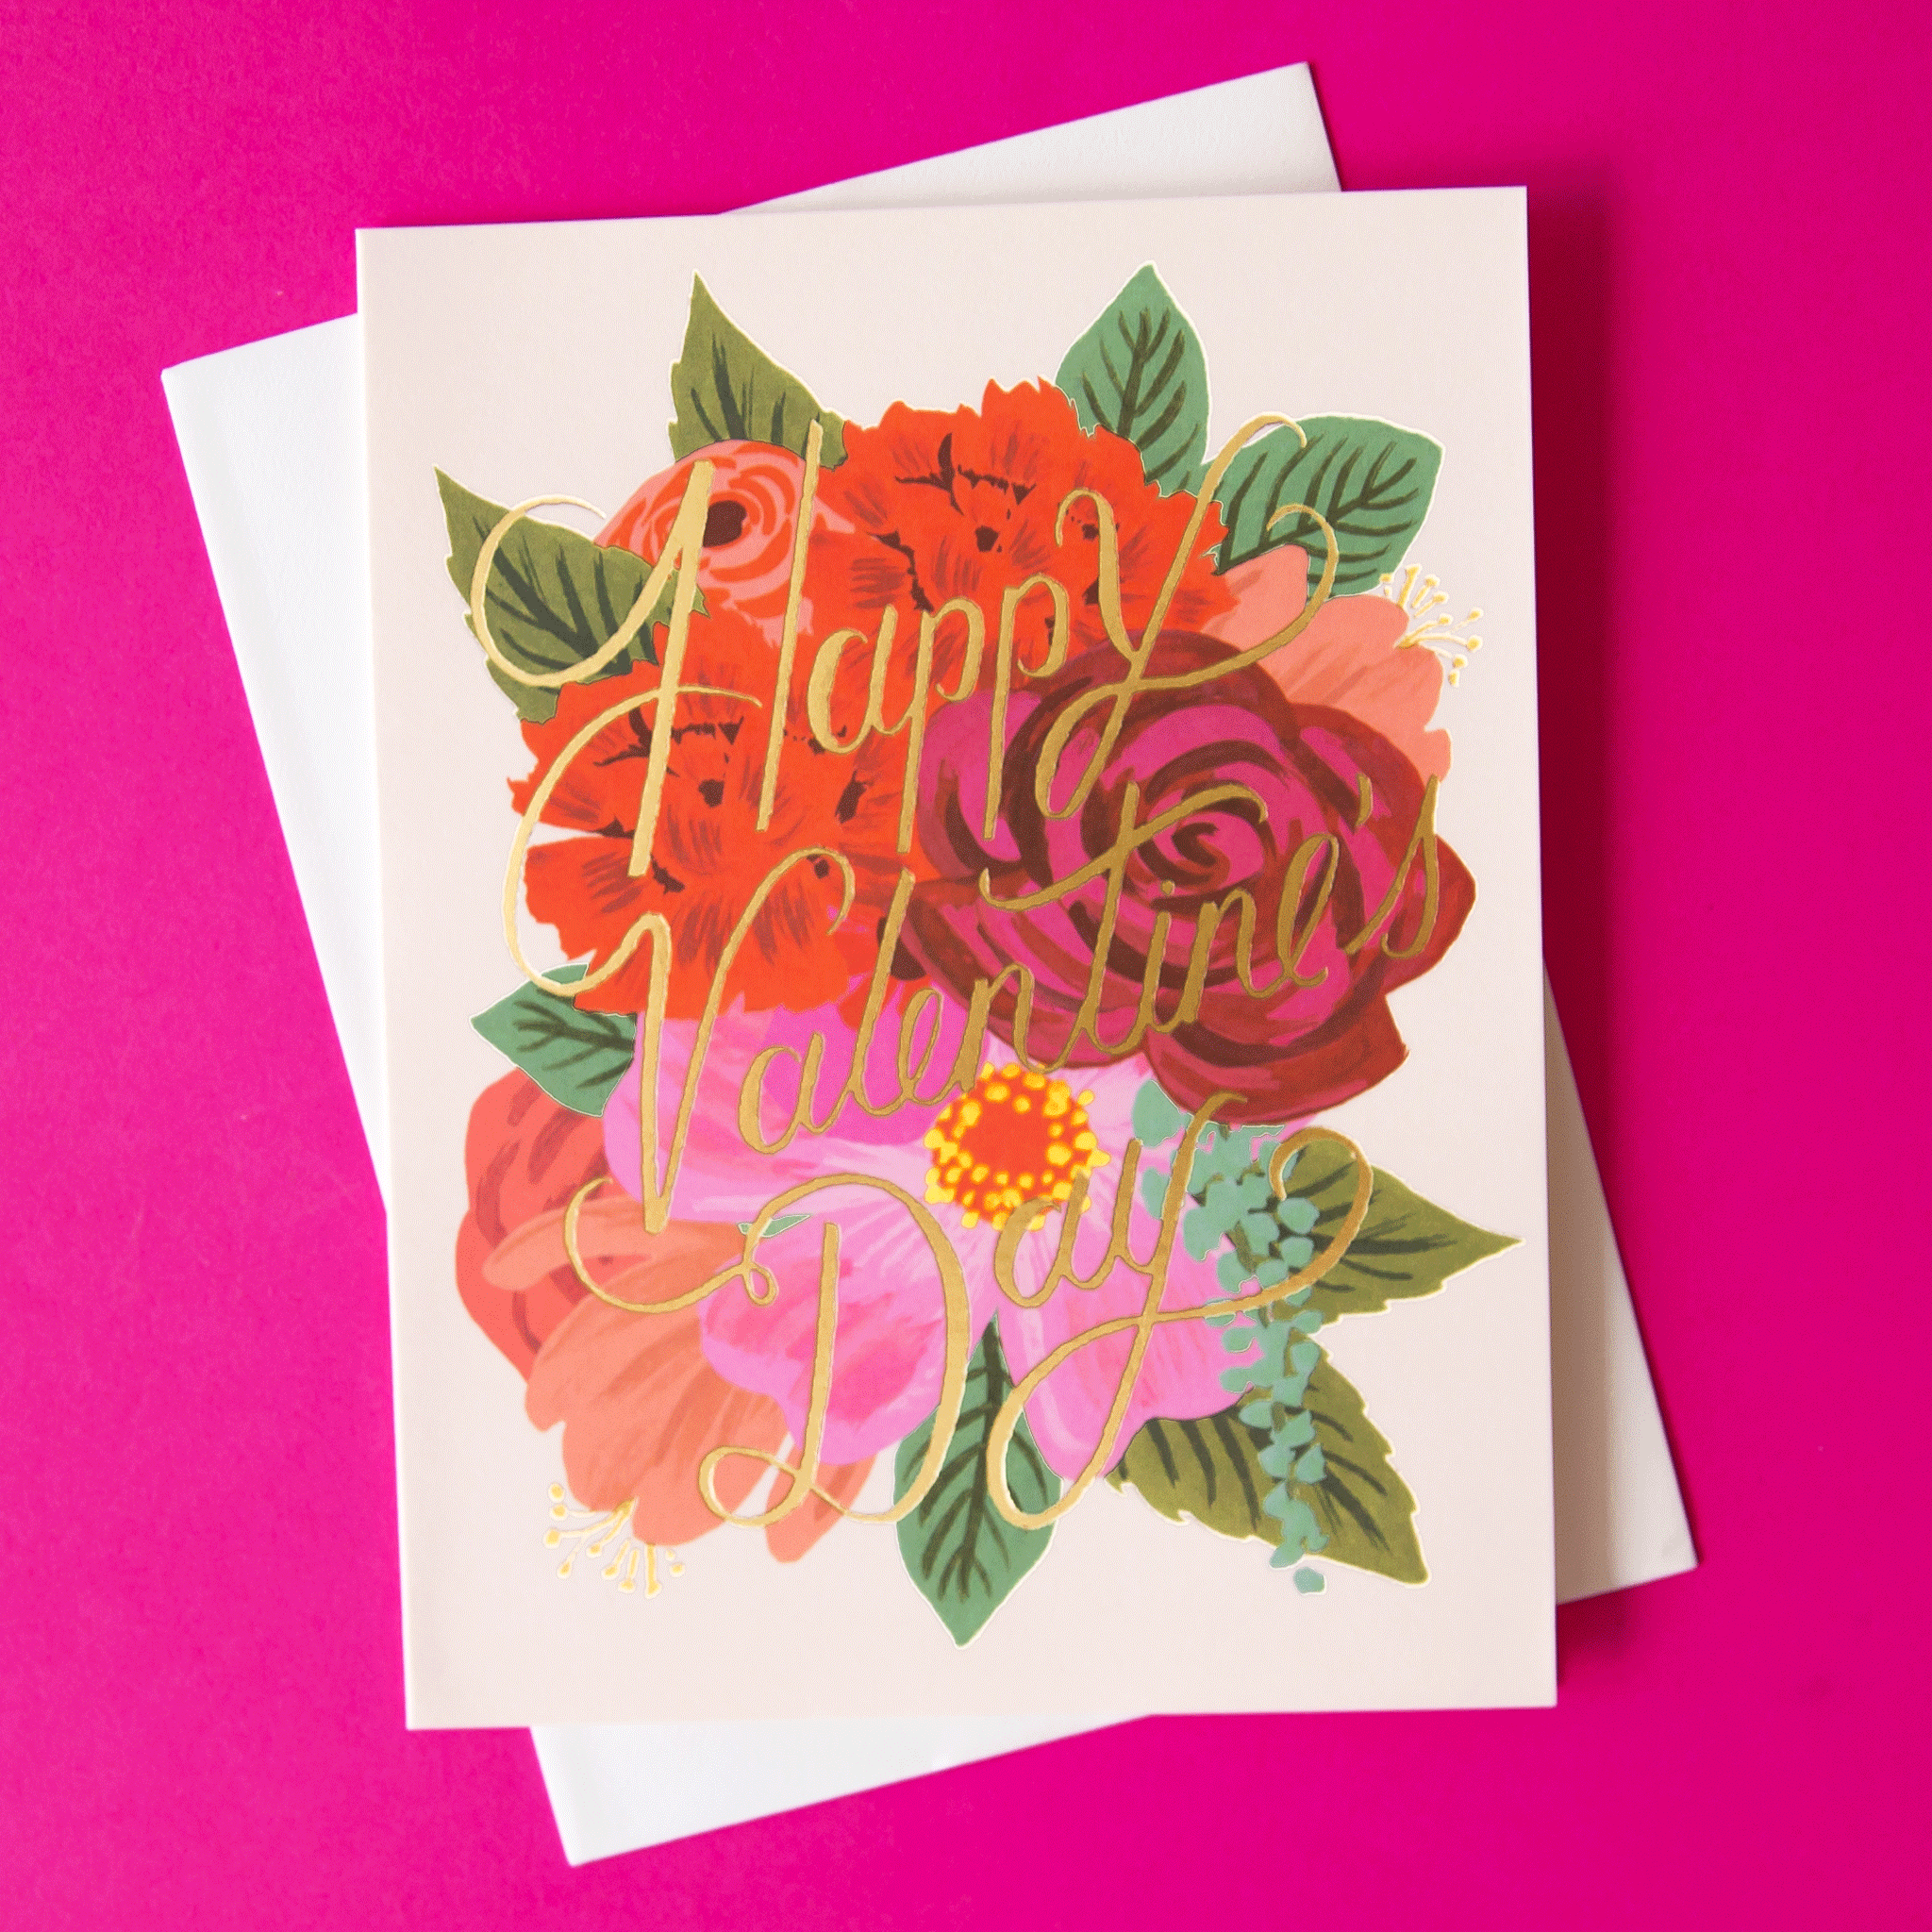 On a hot pink background is a light pink card with a red and pink illustration of a flower bouquet and gold text that reads, "Happy Valentine's Day".